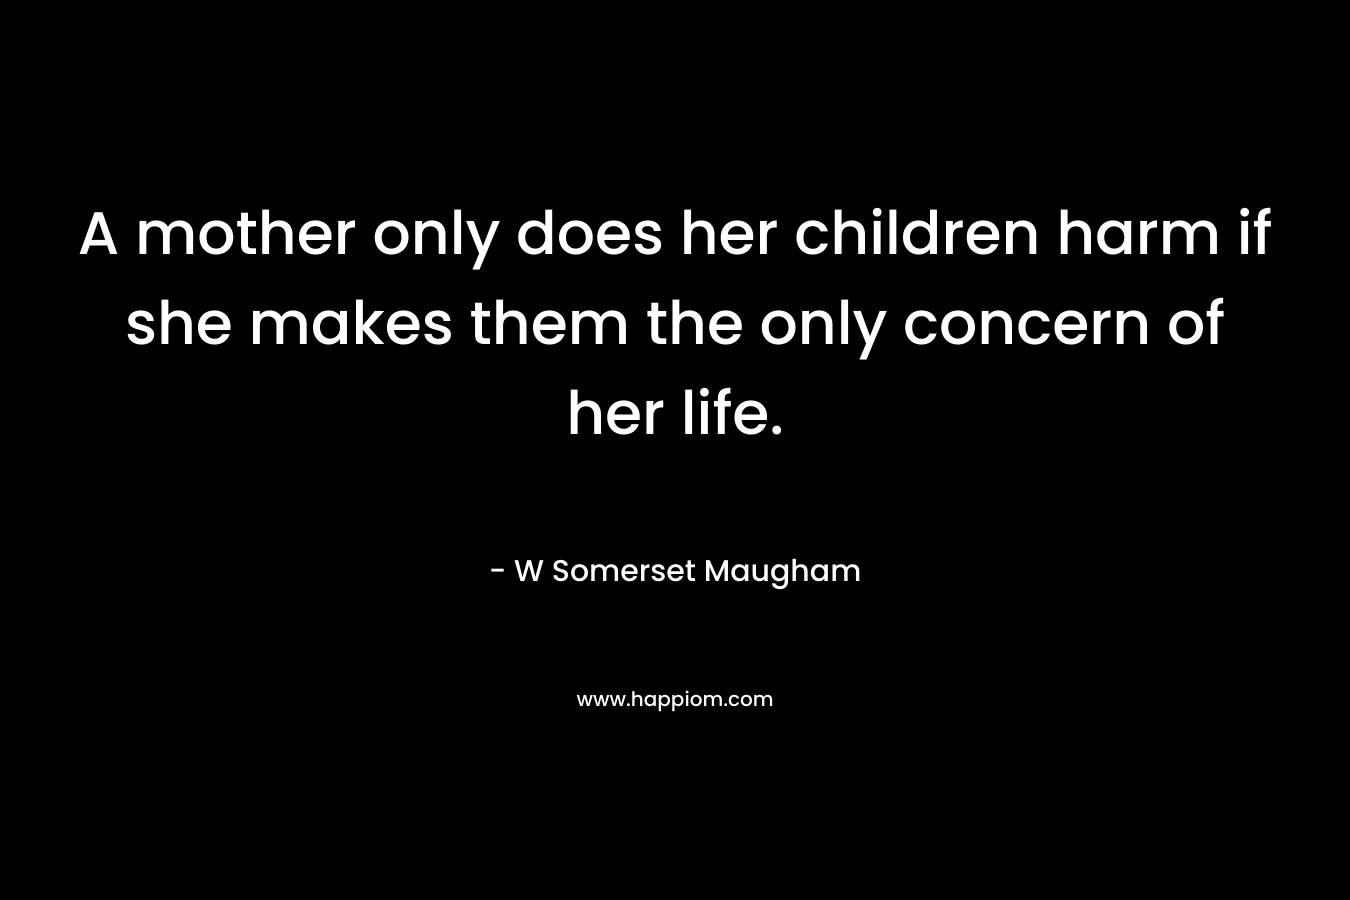 A mother only does her children harm if she makes them the only concern of her life. – W Somerset Maugham